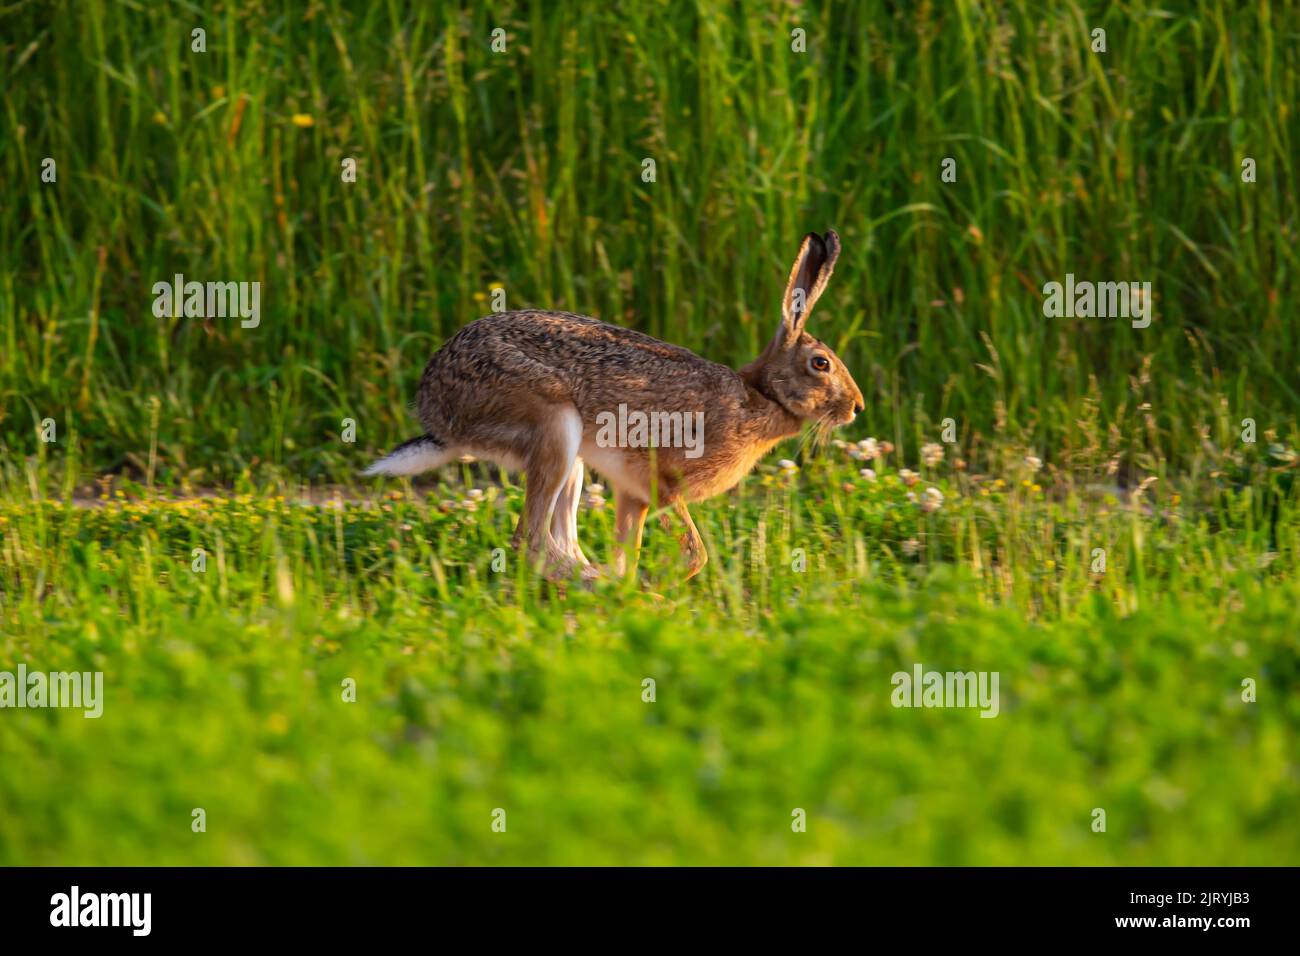 Cape hare (Lepus capensis) Germany Stock Photo